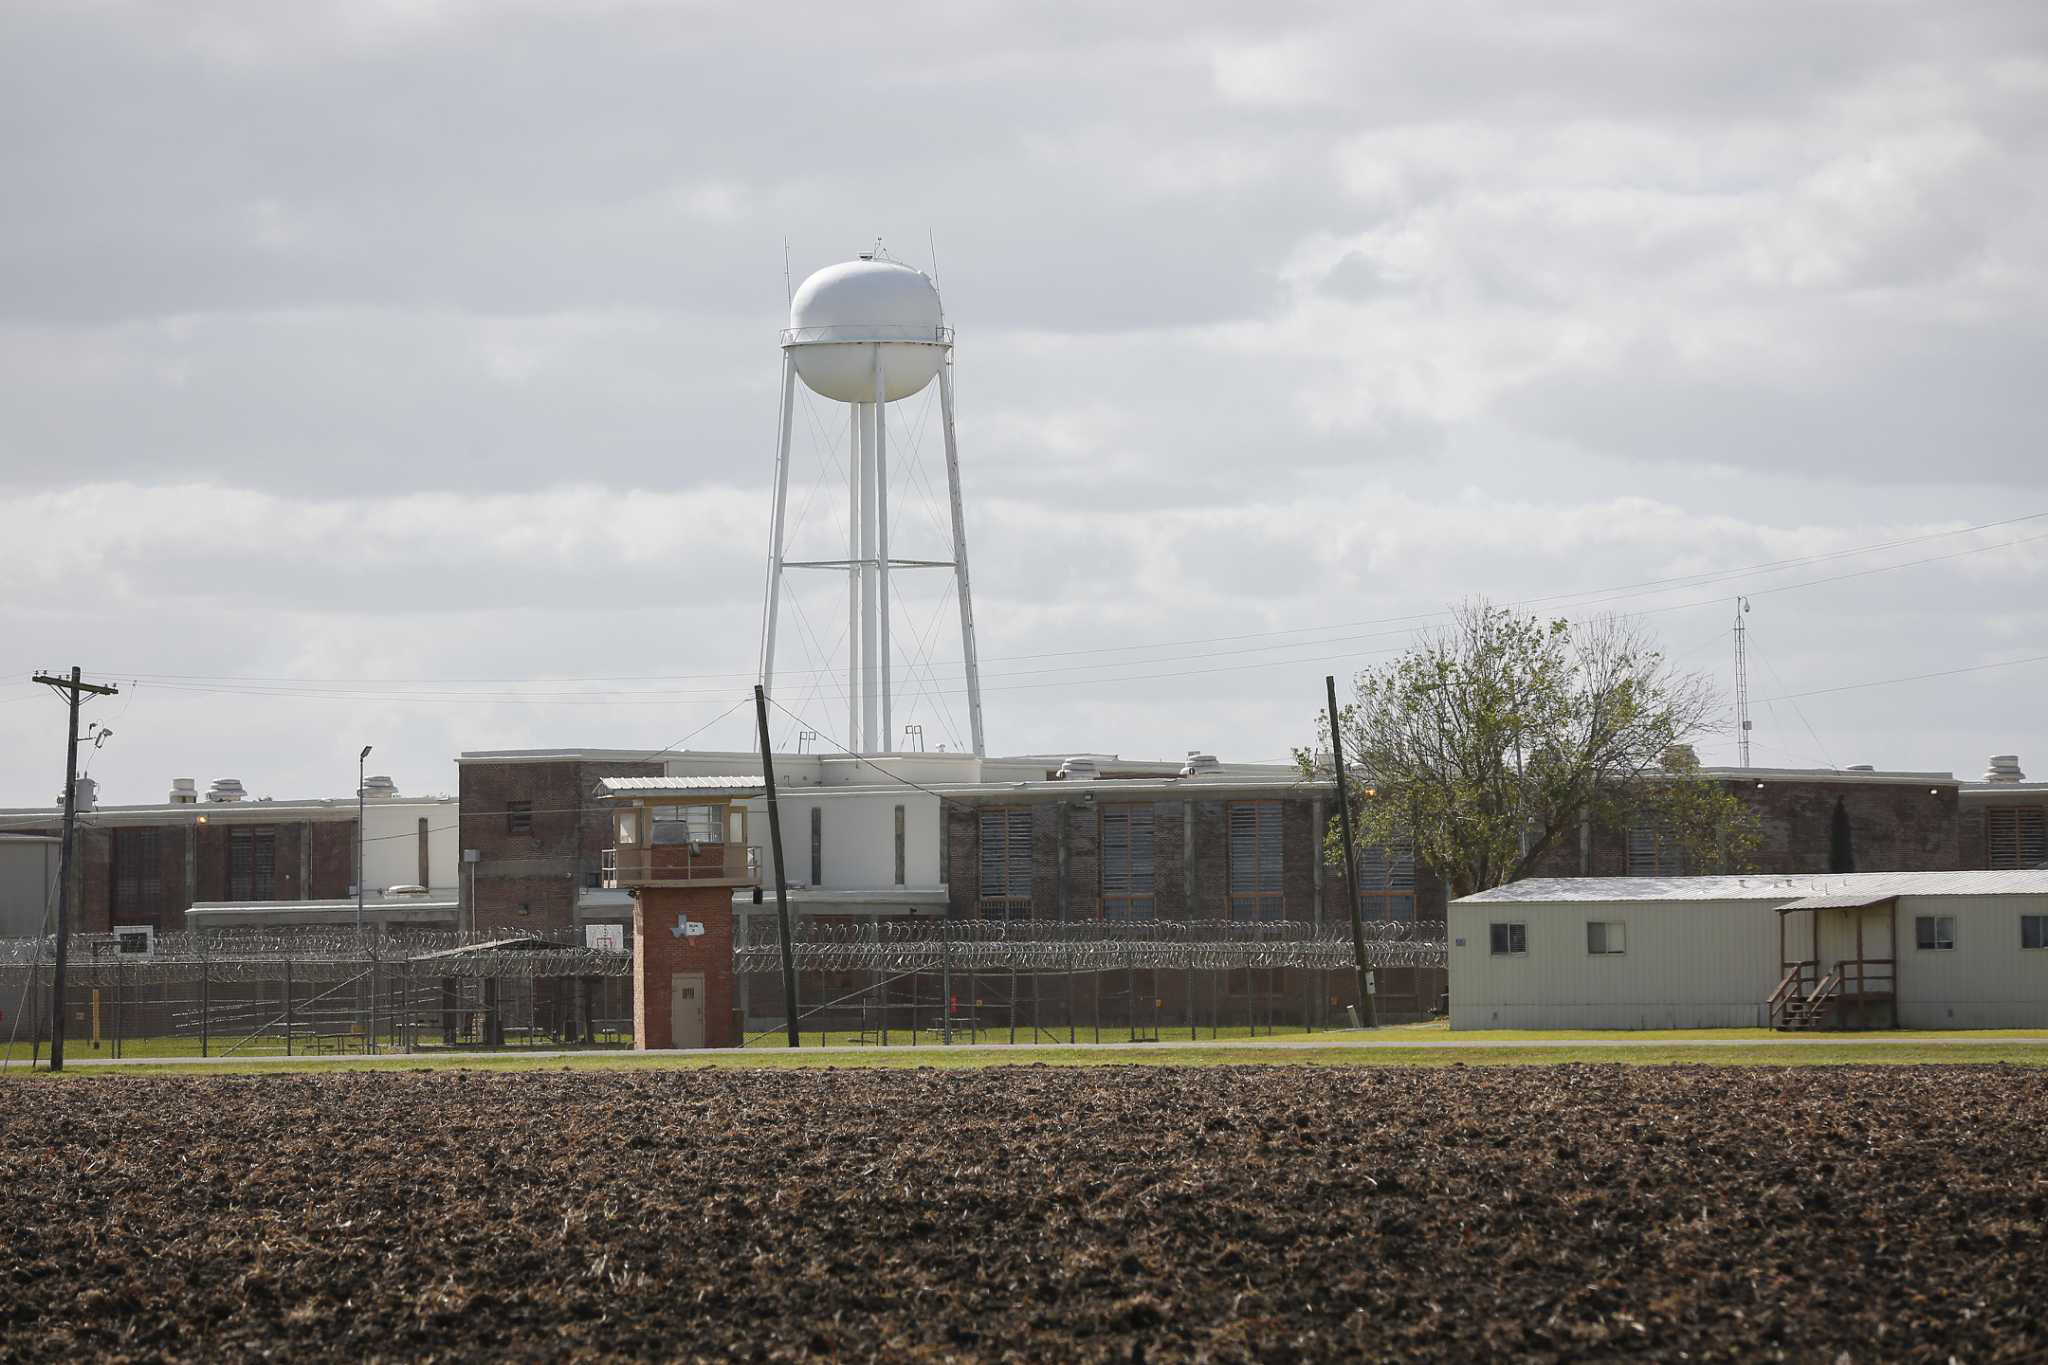 All Texas prisons under lockdown in response to rising violence in